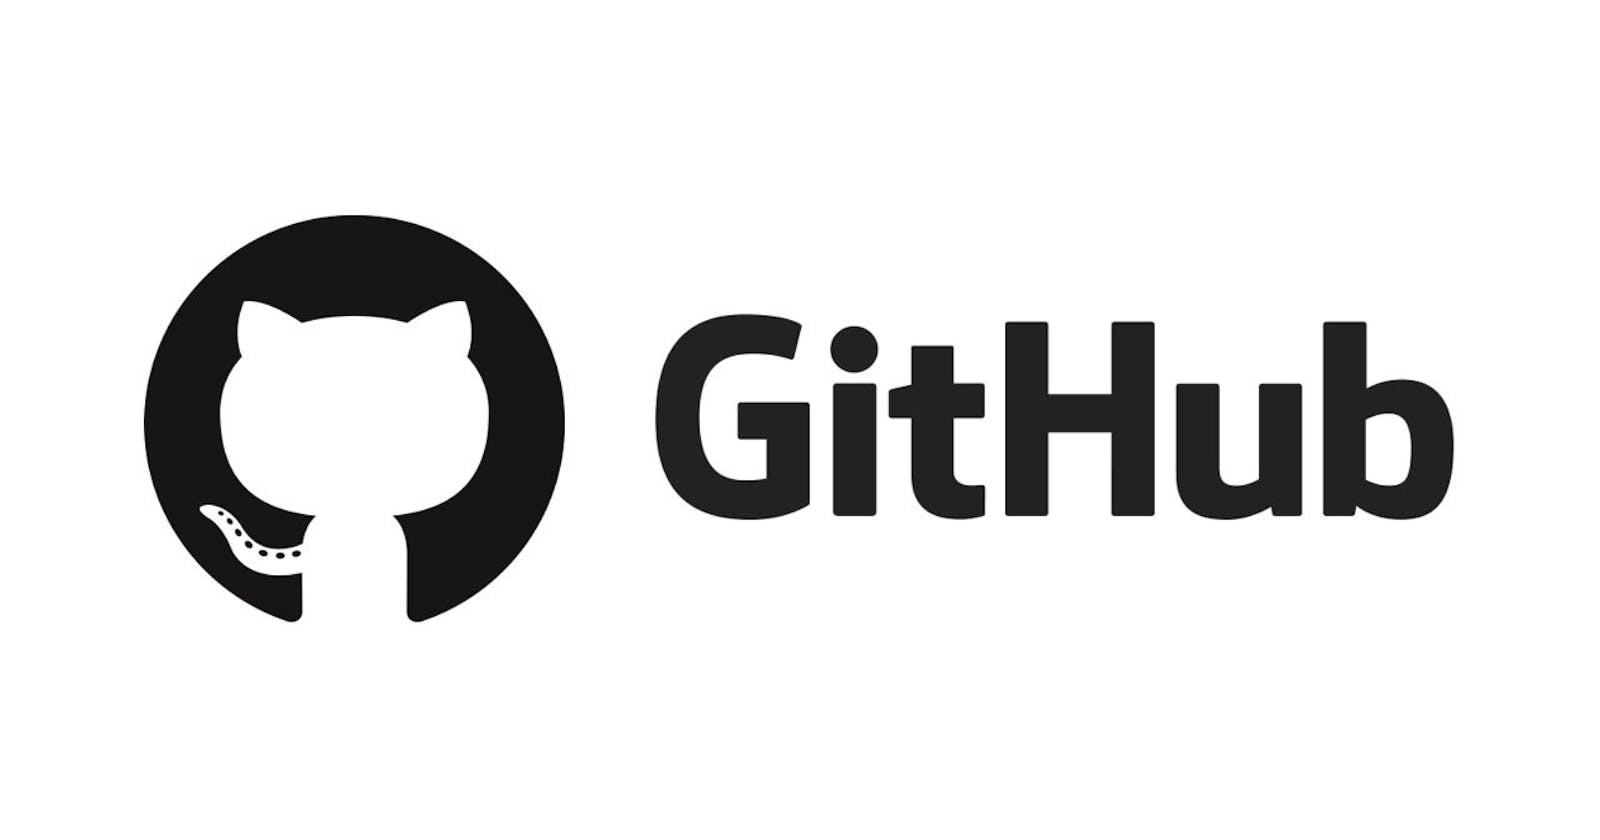 A tutorial on using GitHub for version control in a team setting